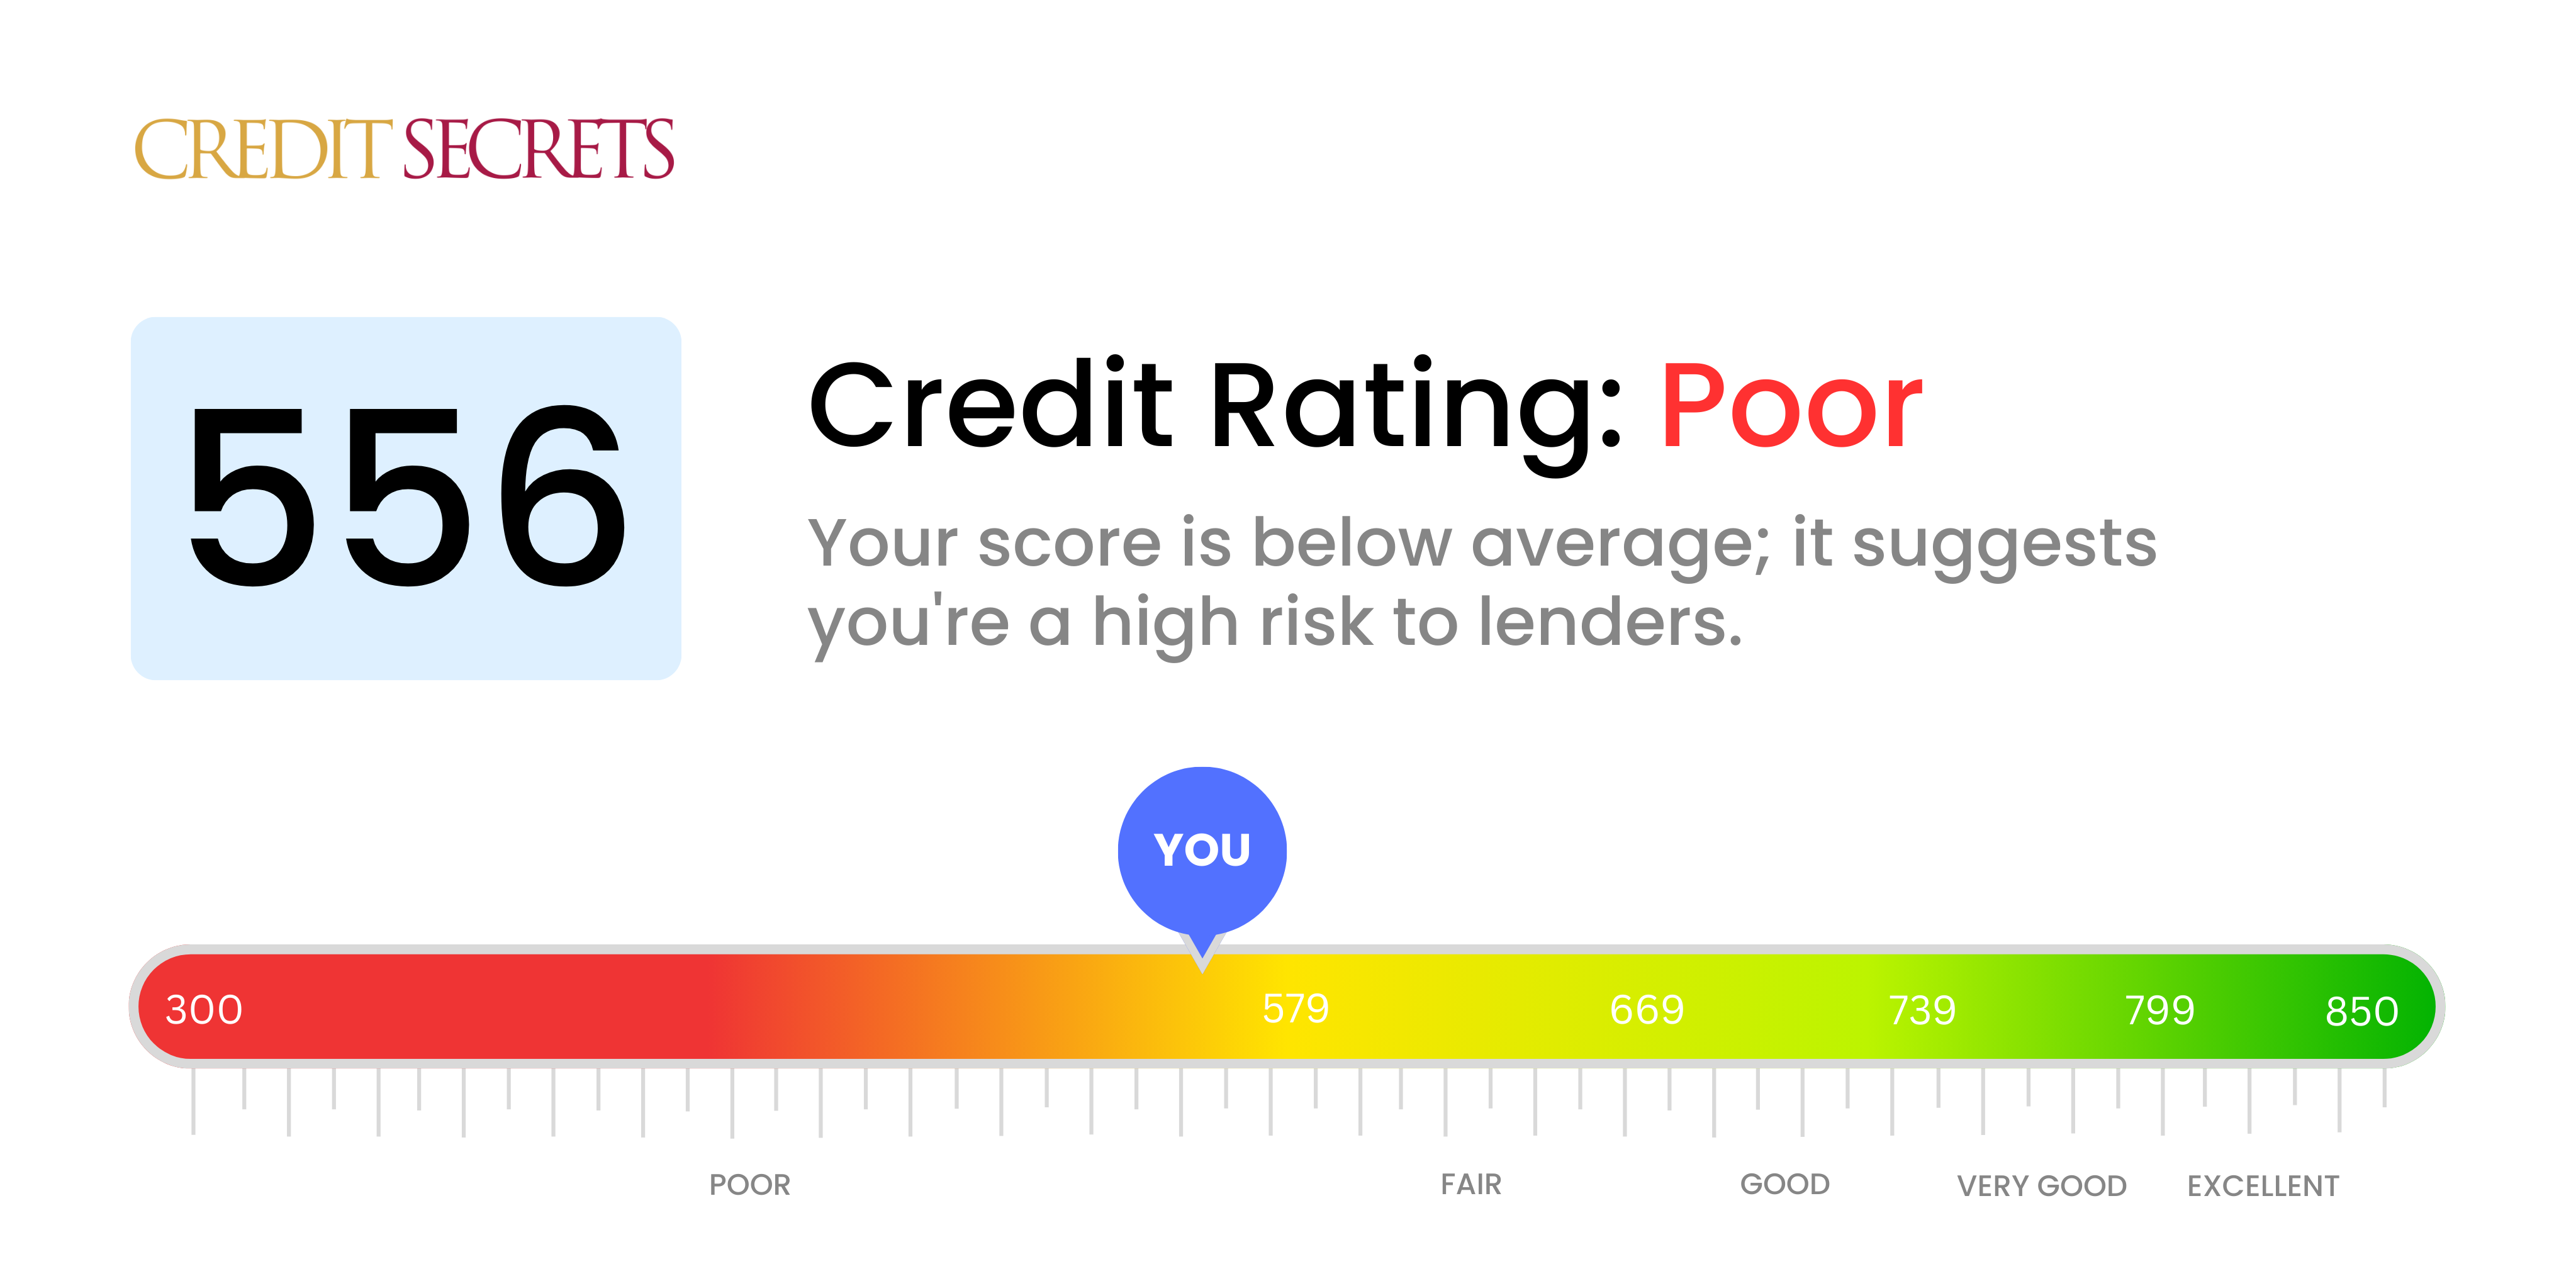 Is 556 a good credit score?